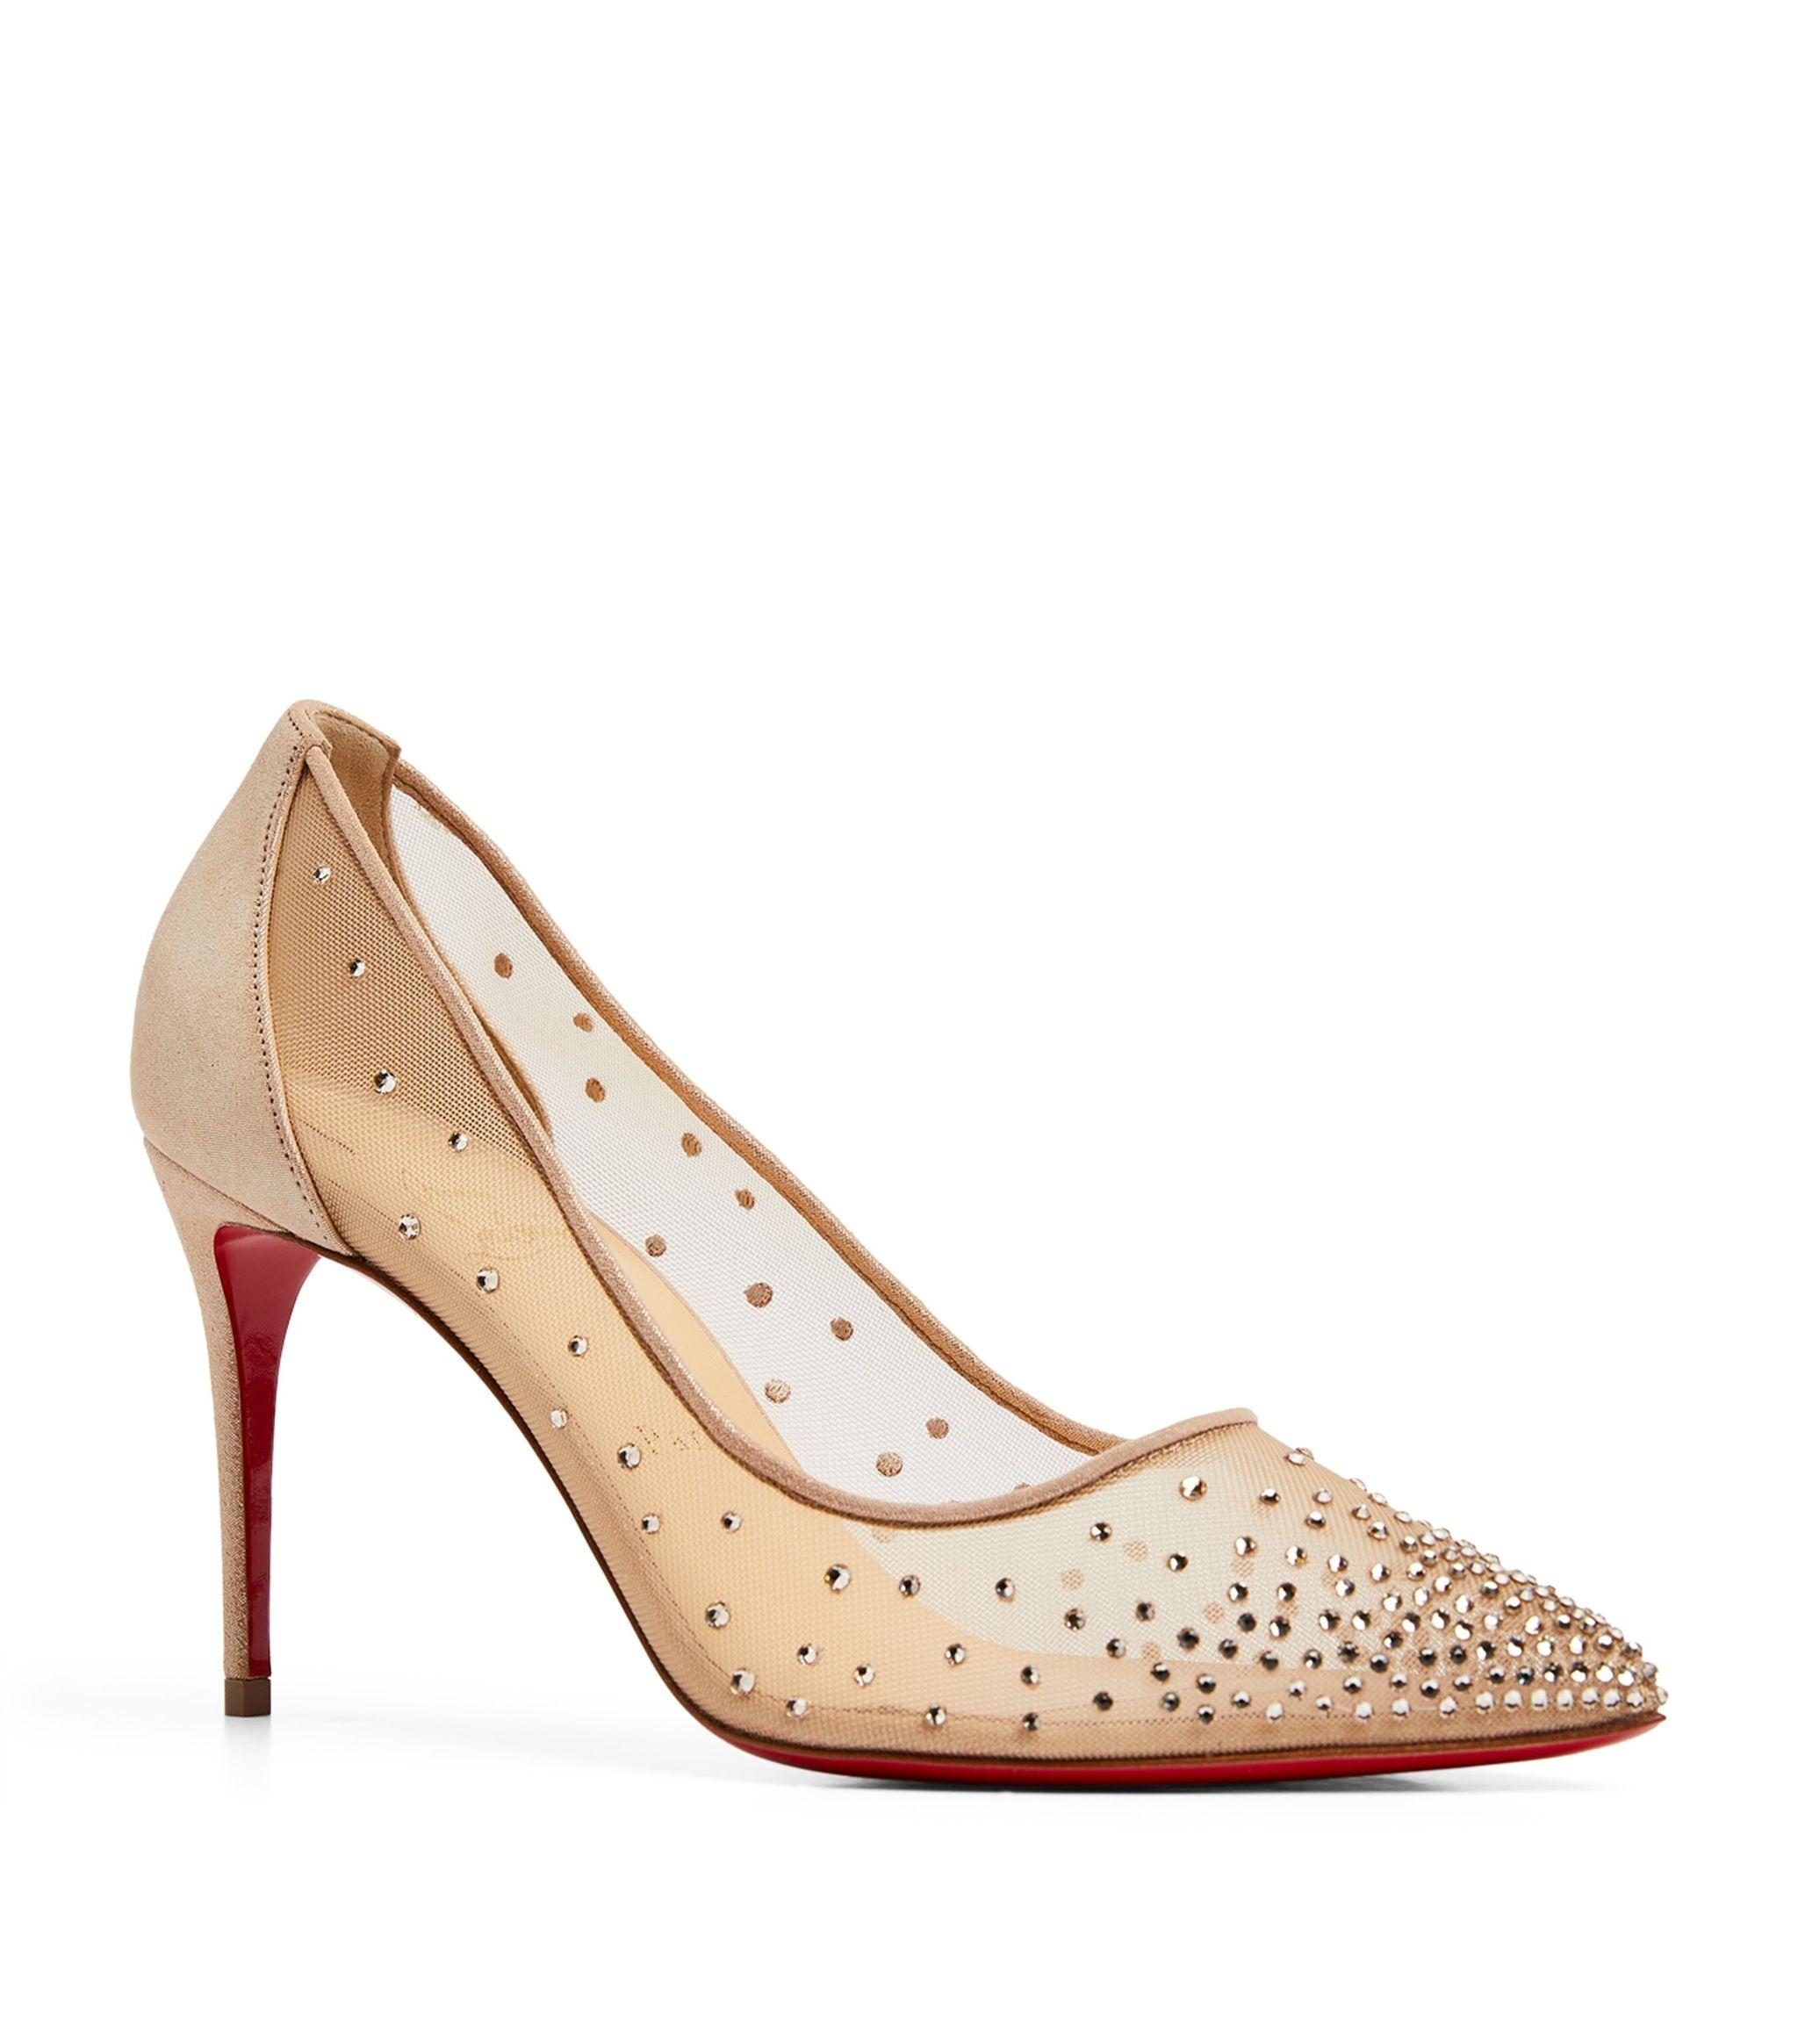 Christian Louboutin Follies Strass Suede Pumps 85 in Natural | Lyst